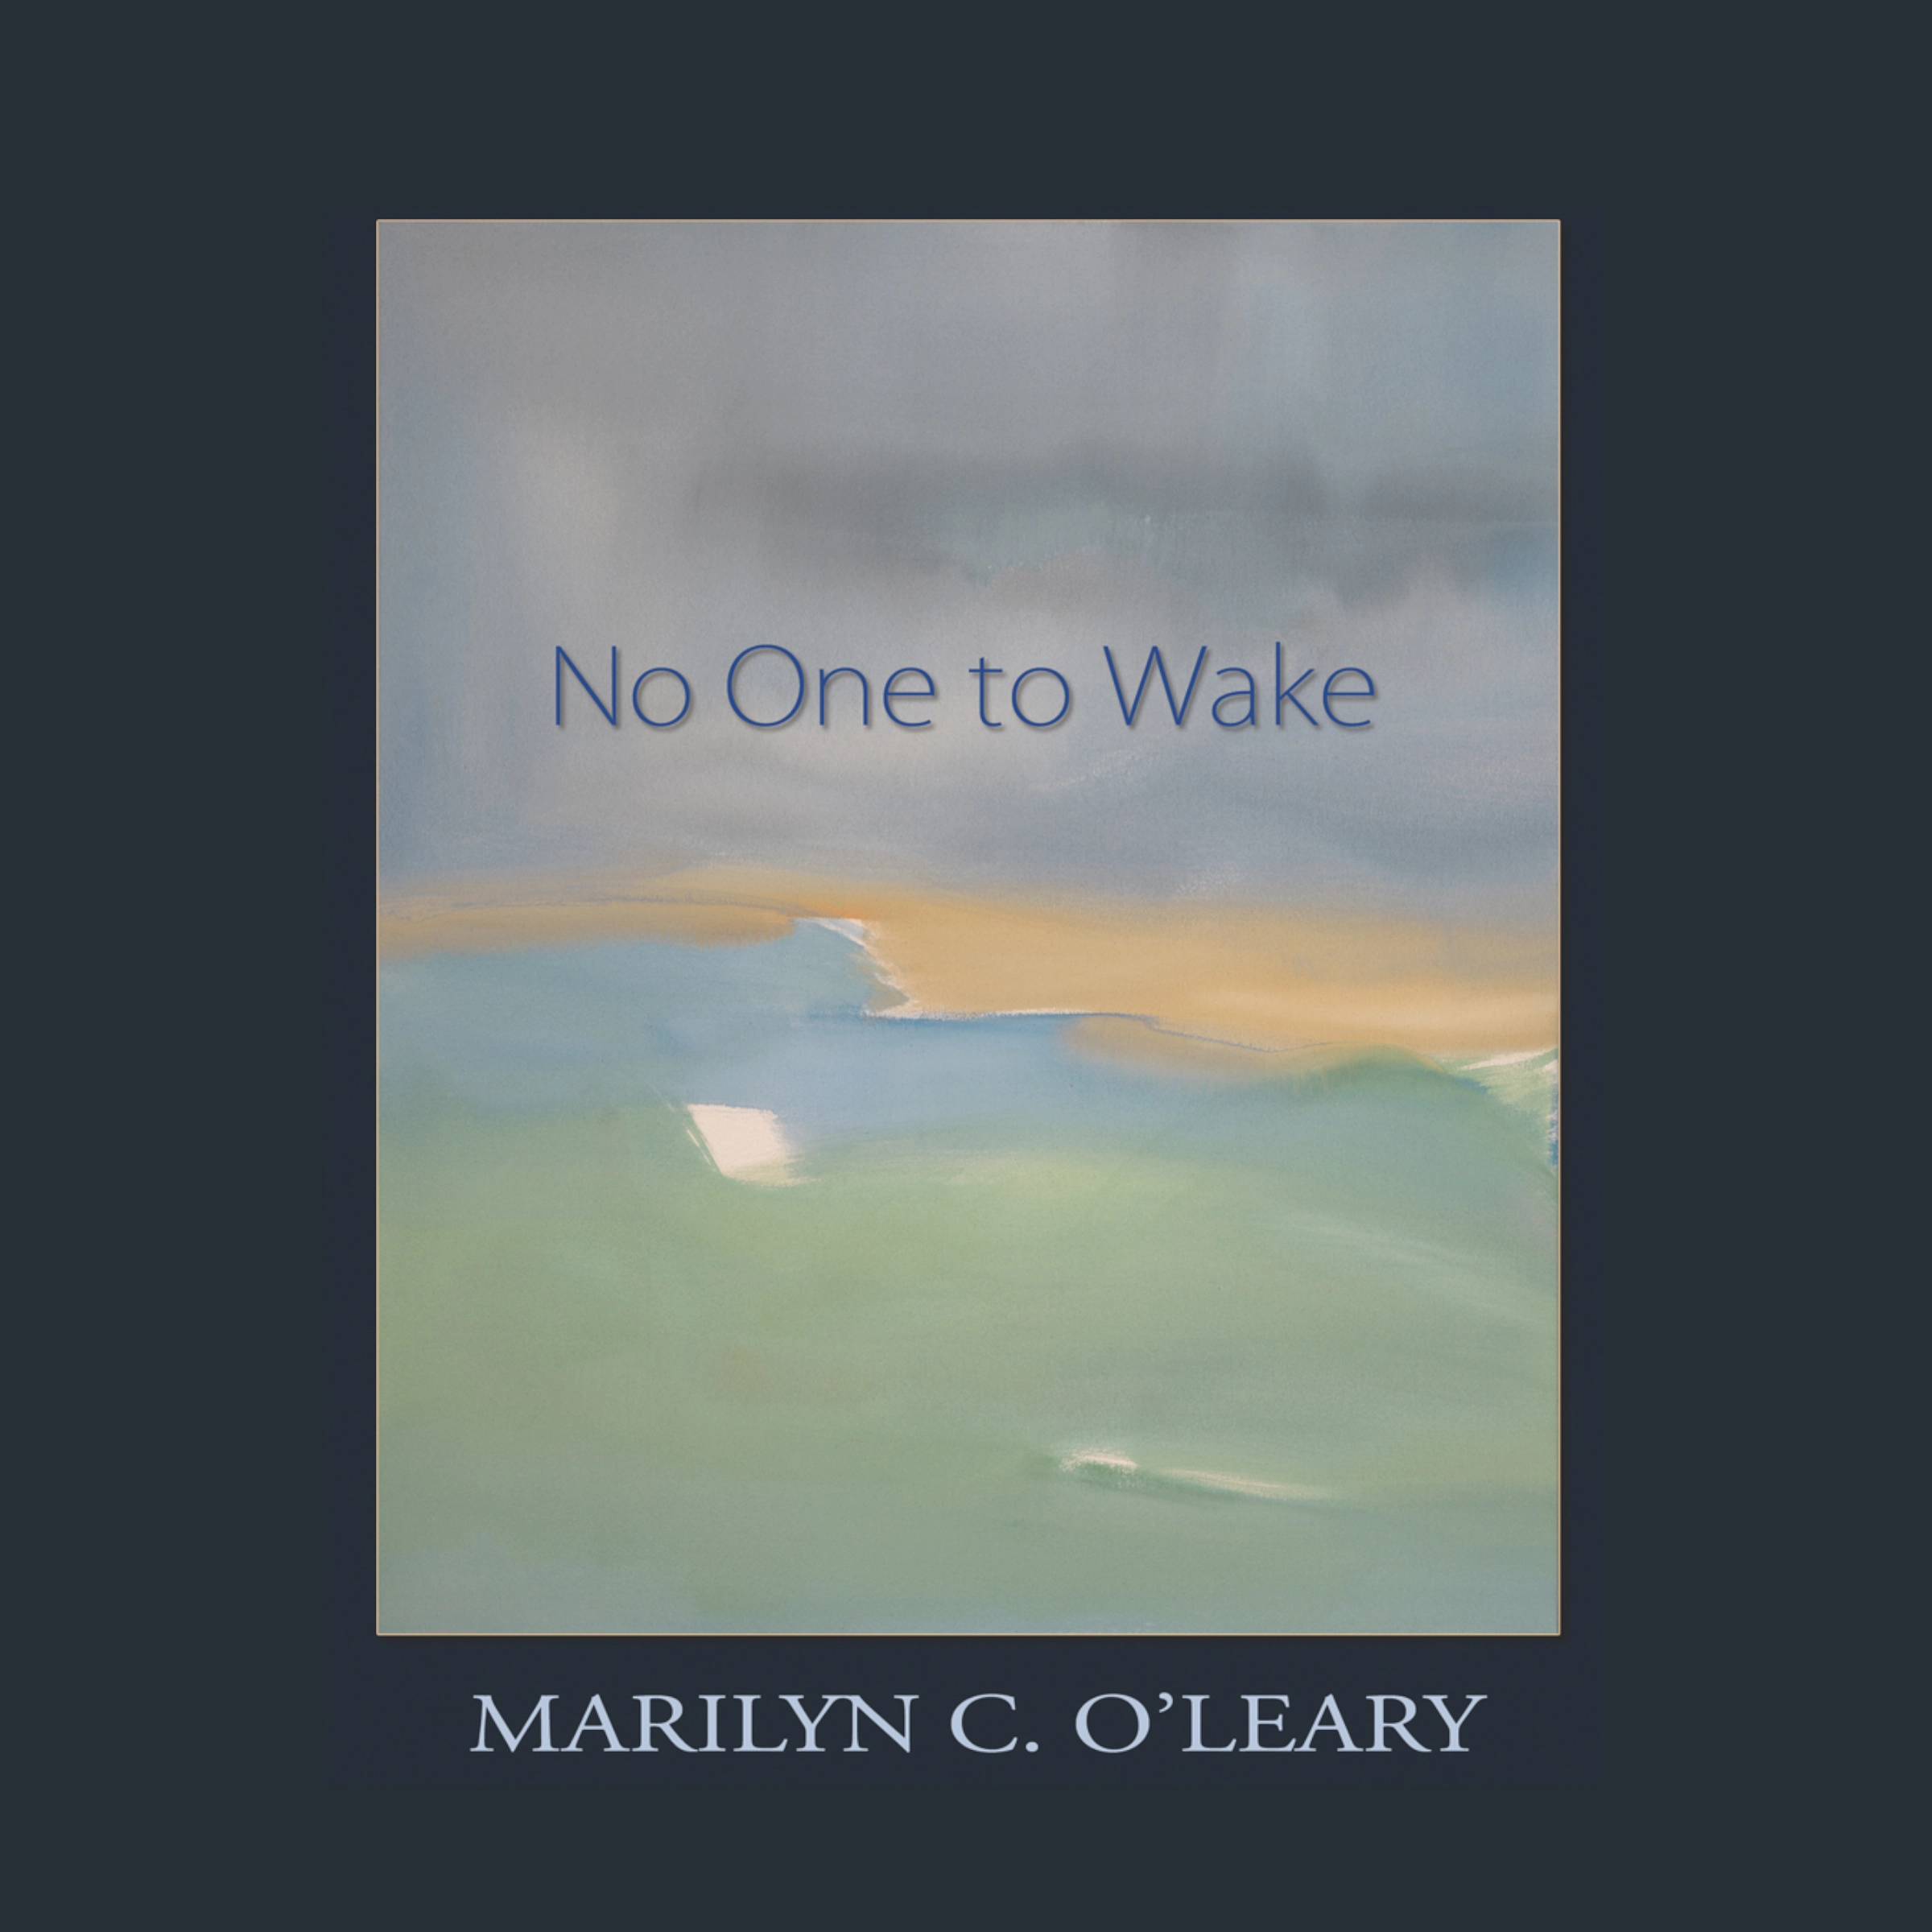 No One to Wake Audiobook by Marilyn C. O'Leary